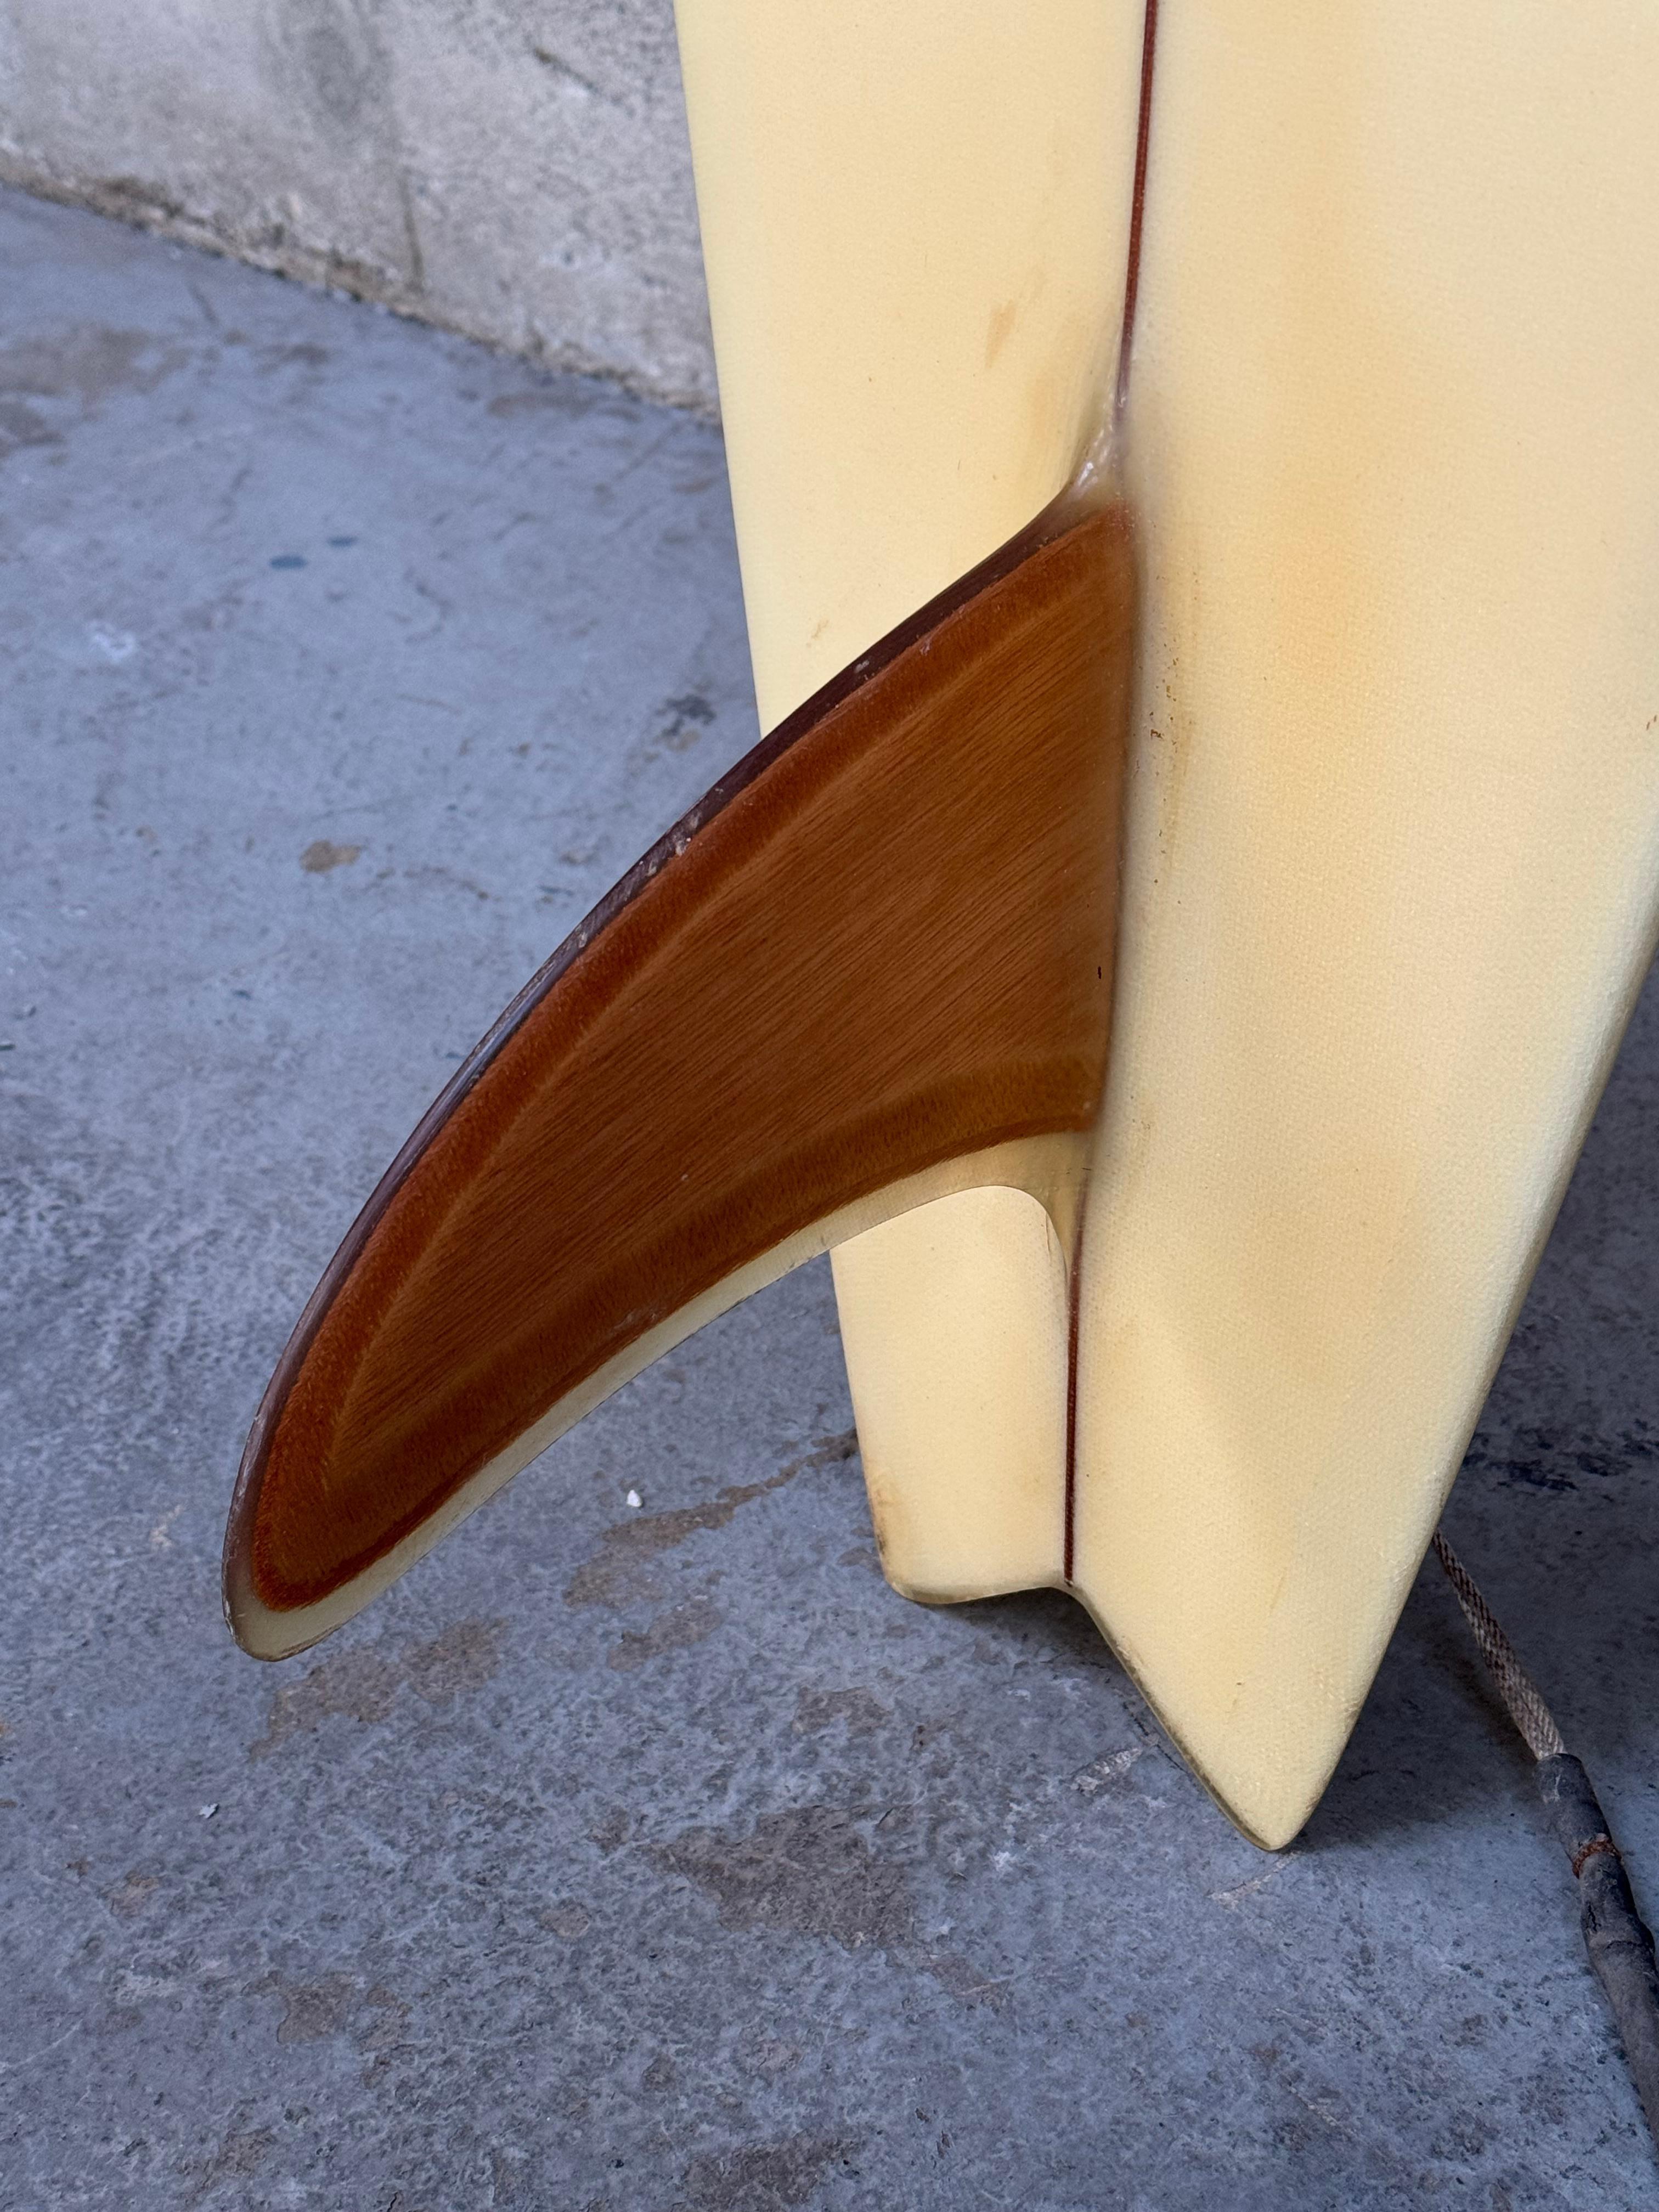 1970s Joey Thomas Single Fin Surfboard an Santa Cruz Surf History Artifact In Good Condition For Sale In Oakland, CA